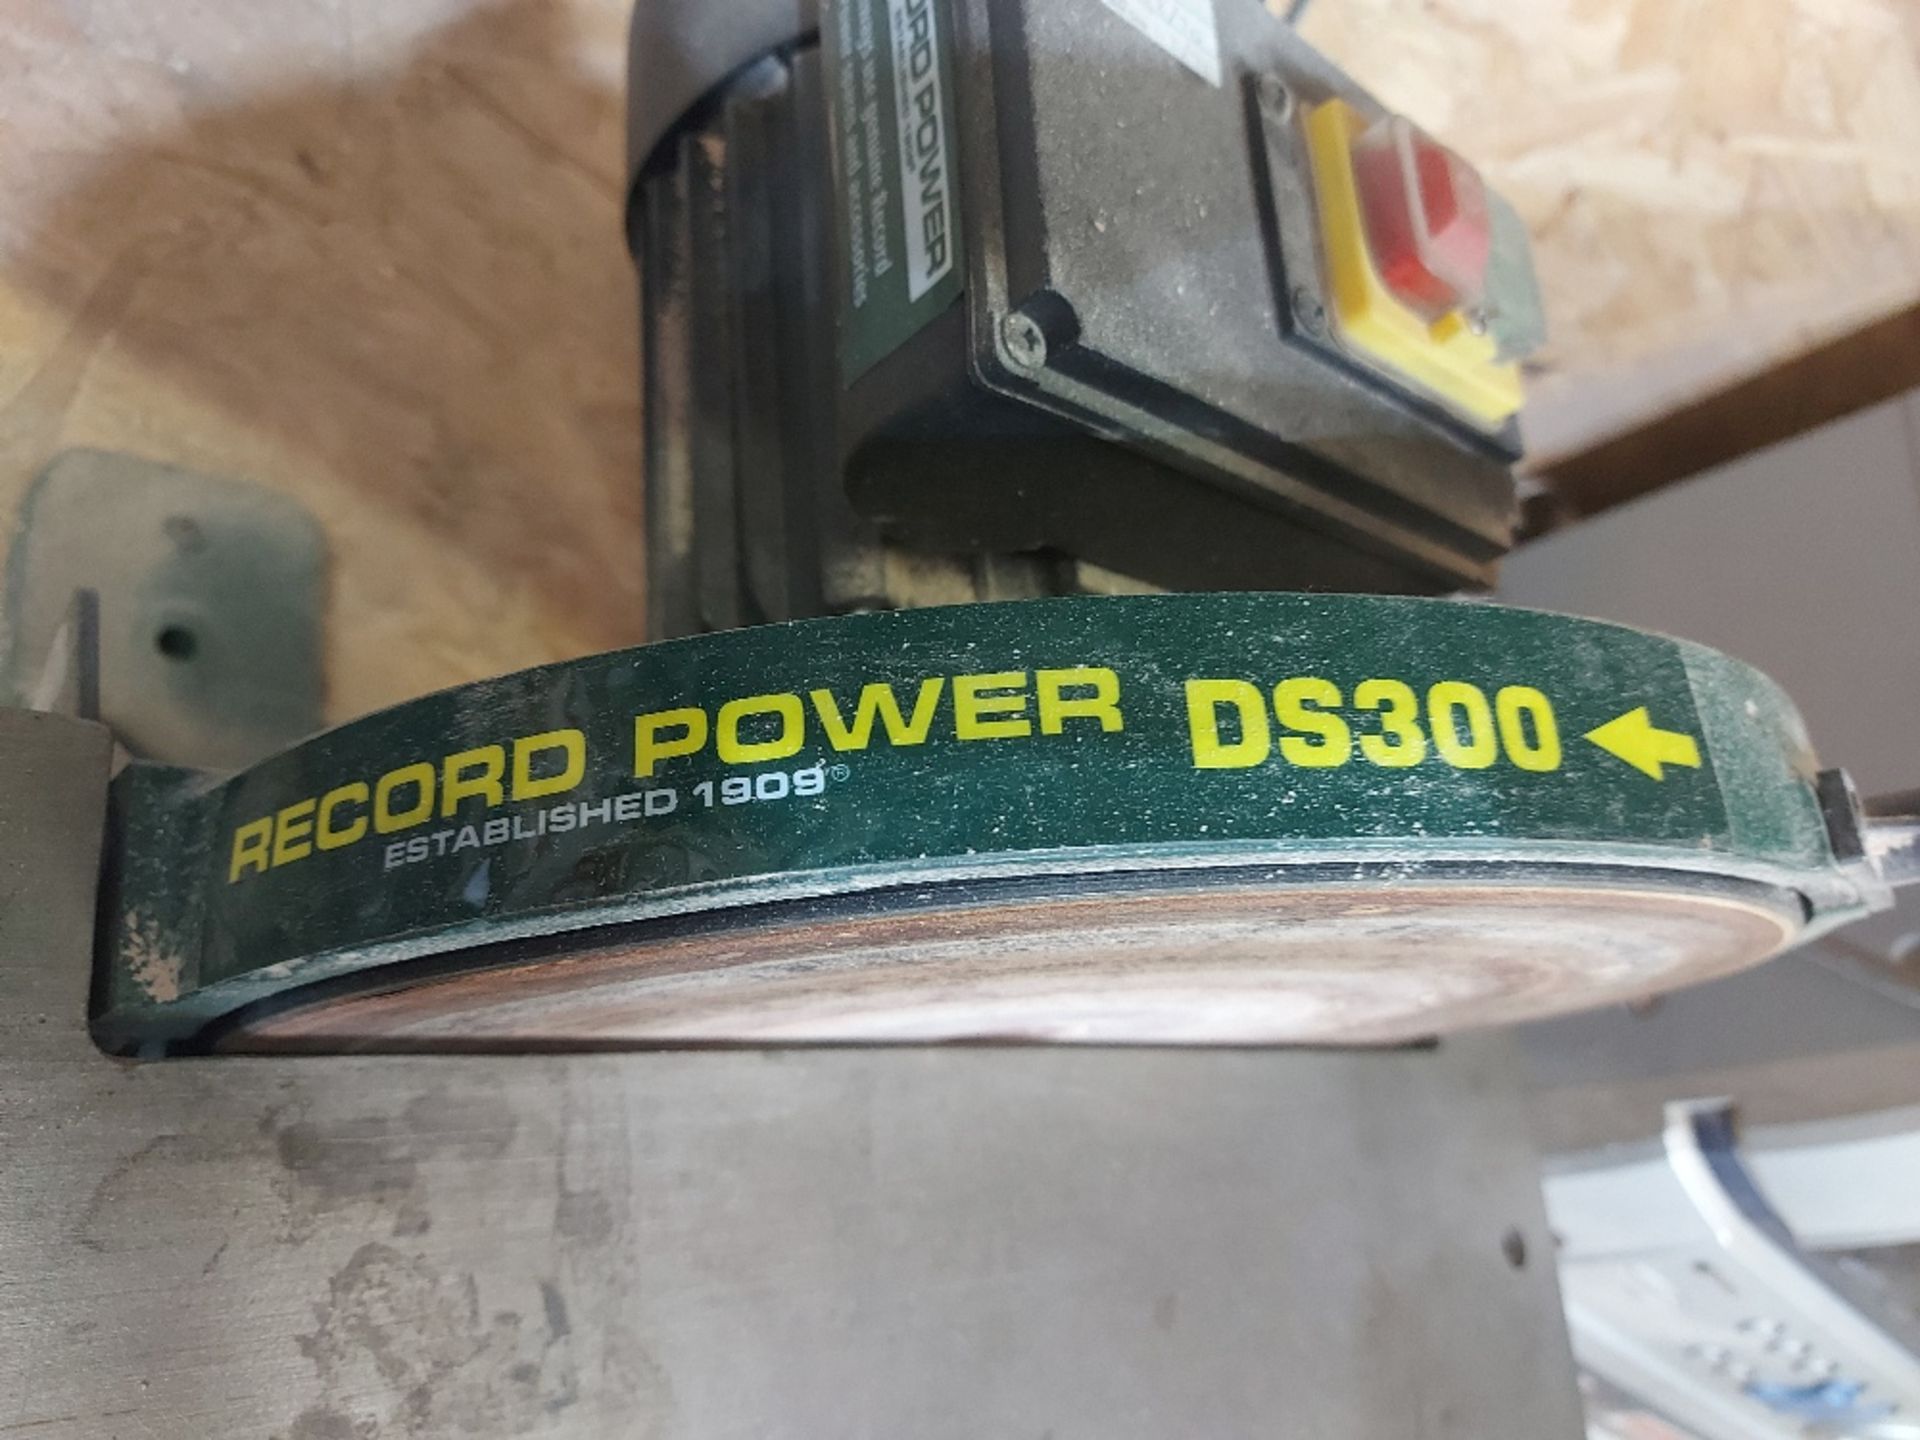 Record Power DS300 12" Cast Iron Disk Sander - Image 3 of 5